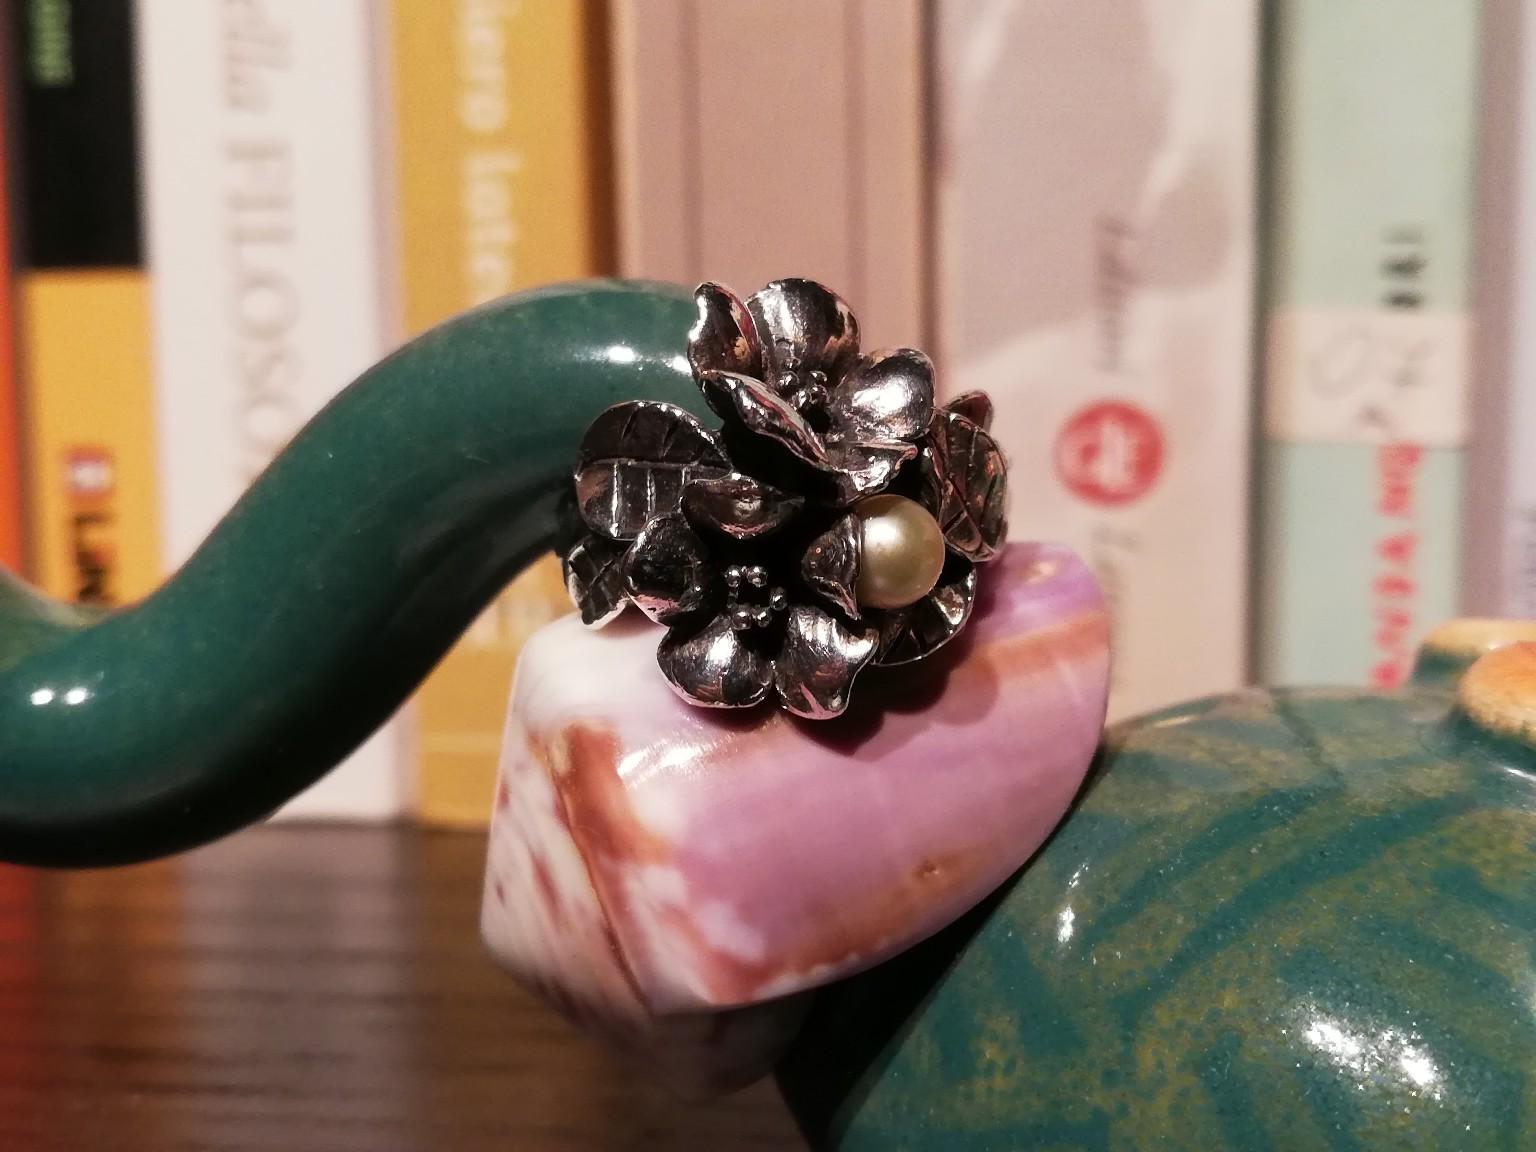 Anello Trollbeads biancospino in 60131 Ancona for €55.00 for sale 